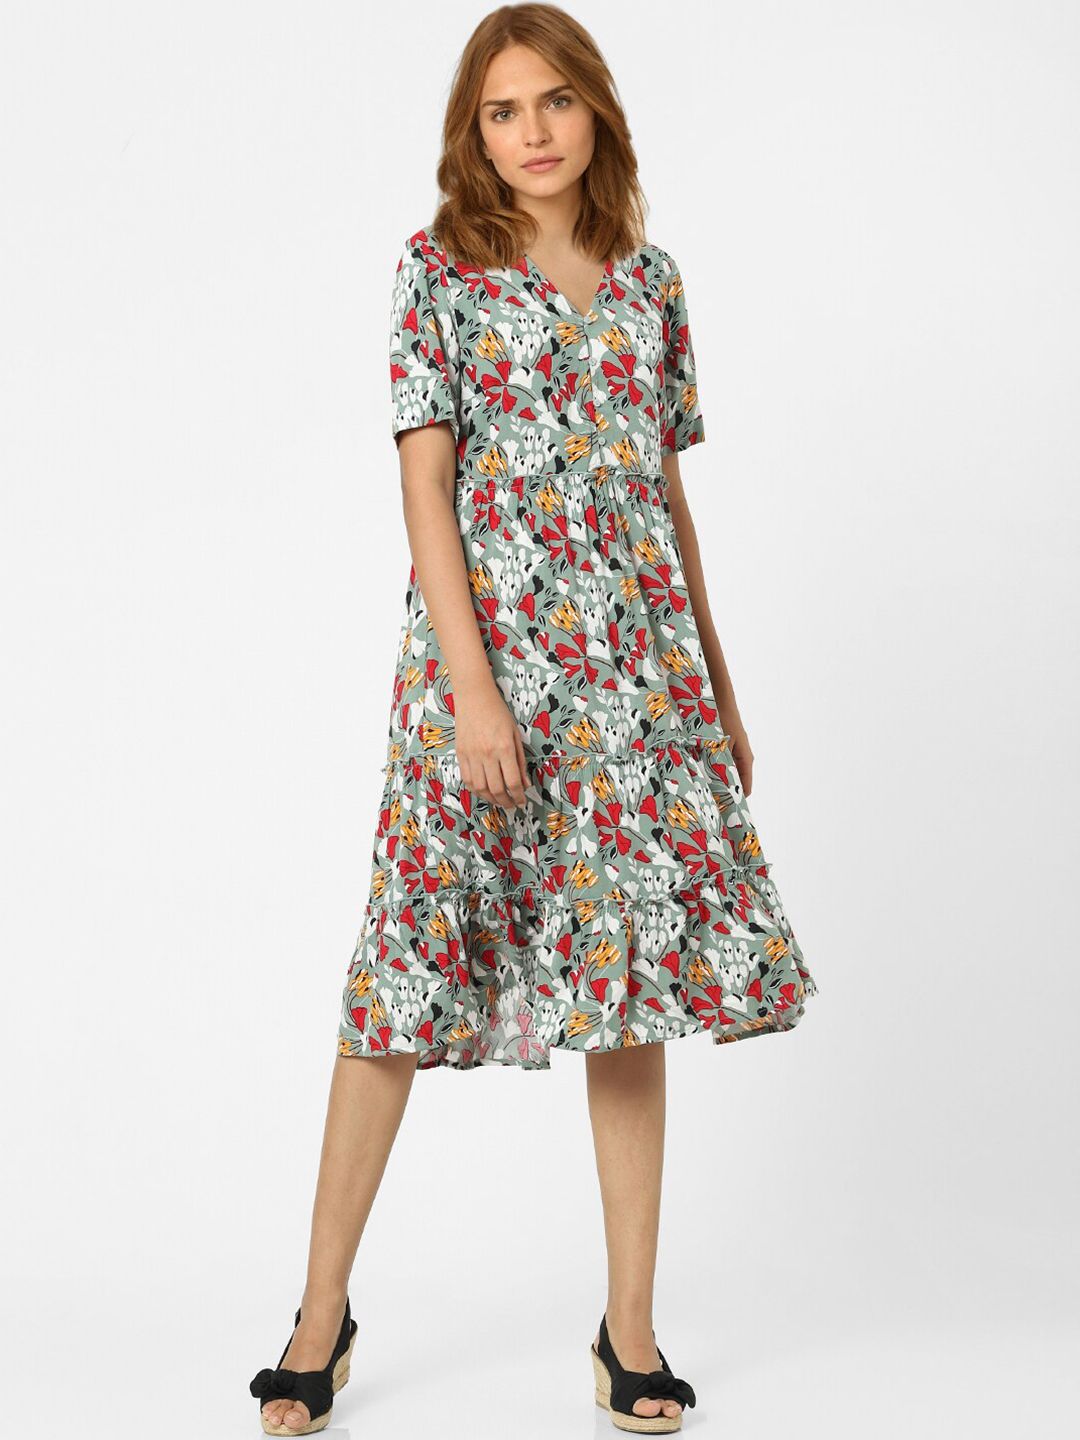 Vero Moda Grey & Multicoloured Floral Layered Fit and Flare Dress Price in India